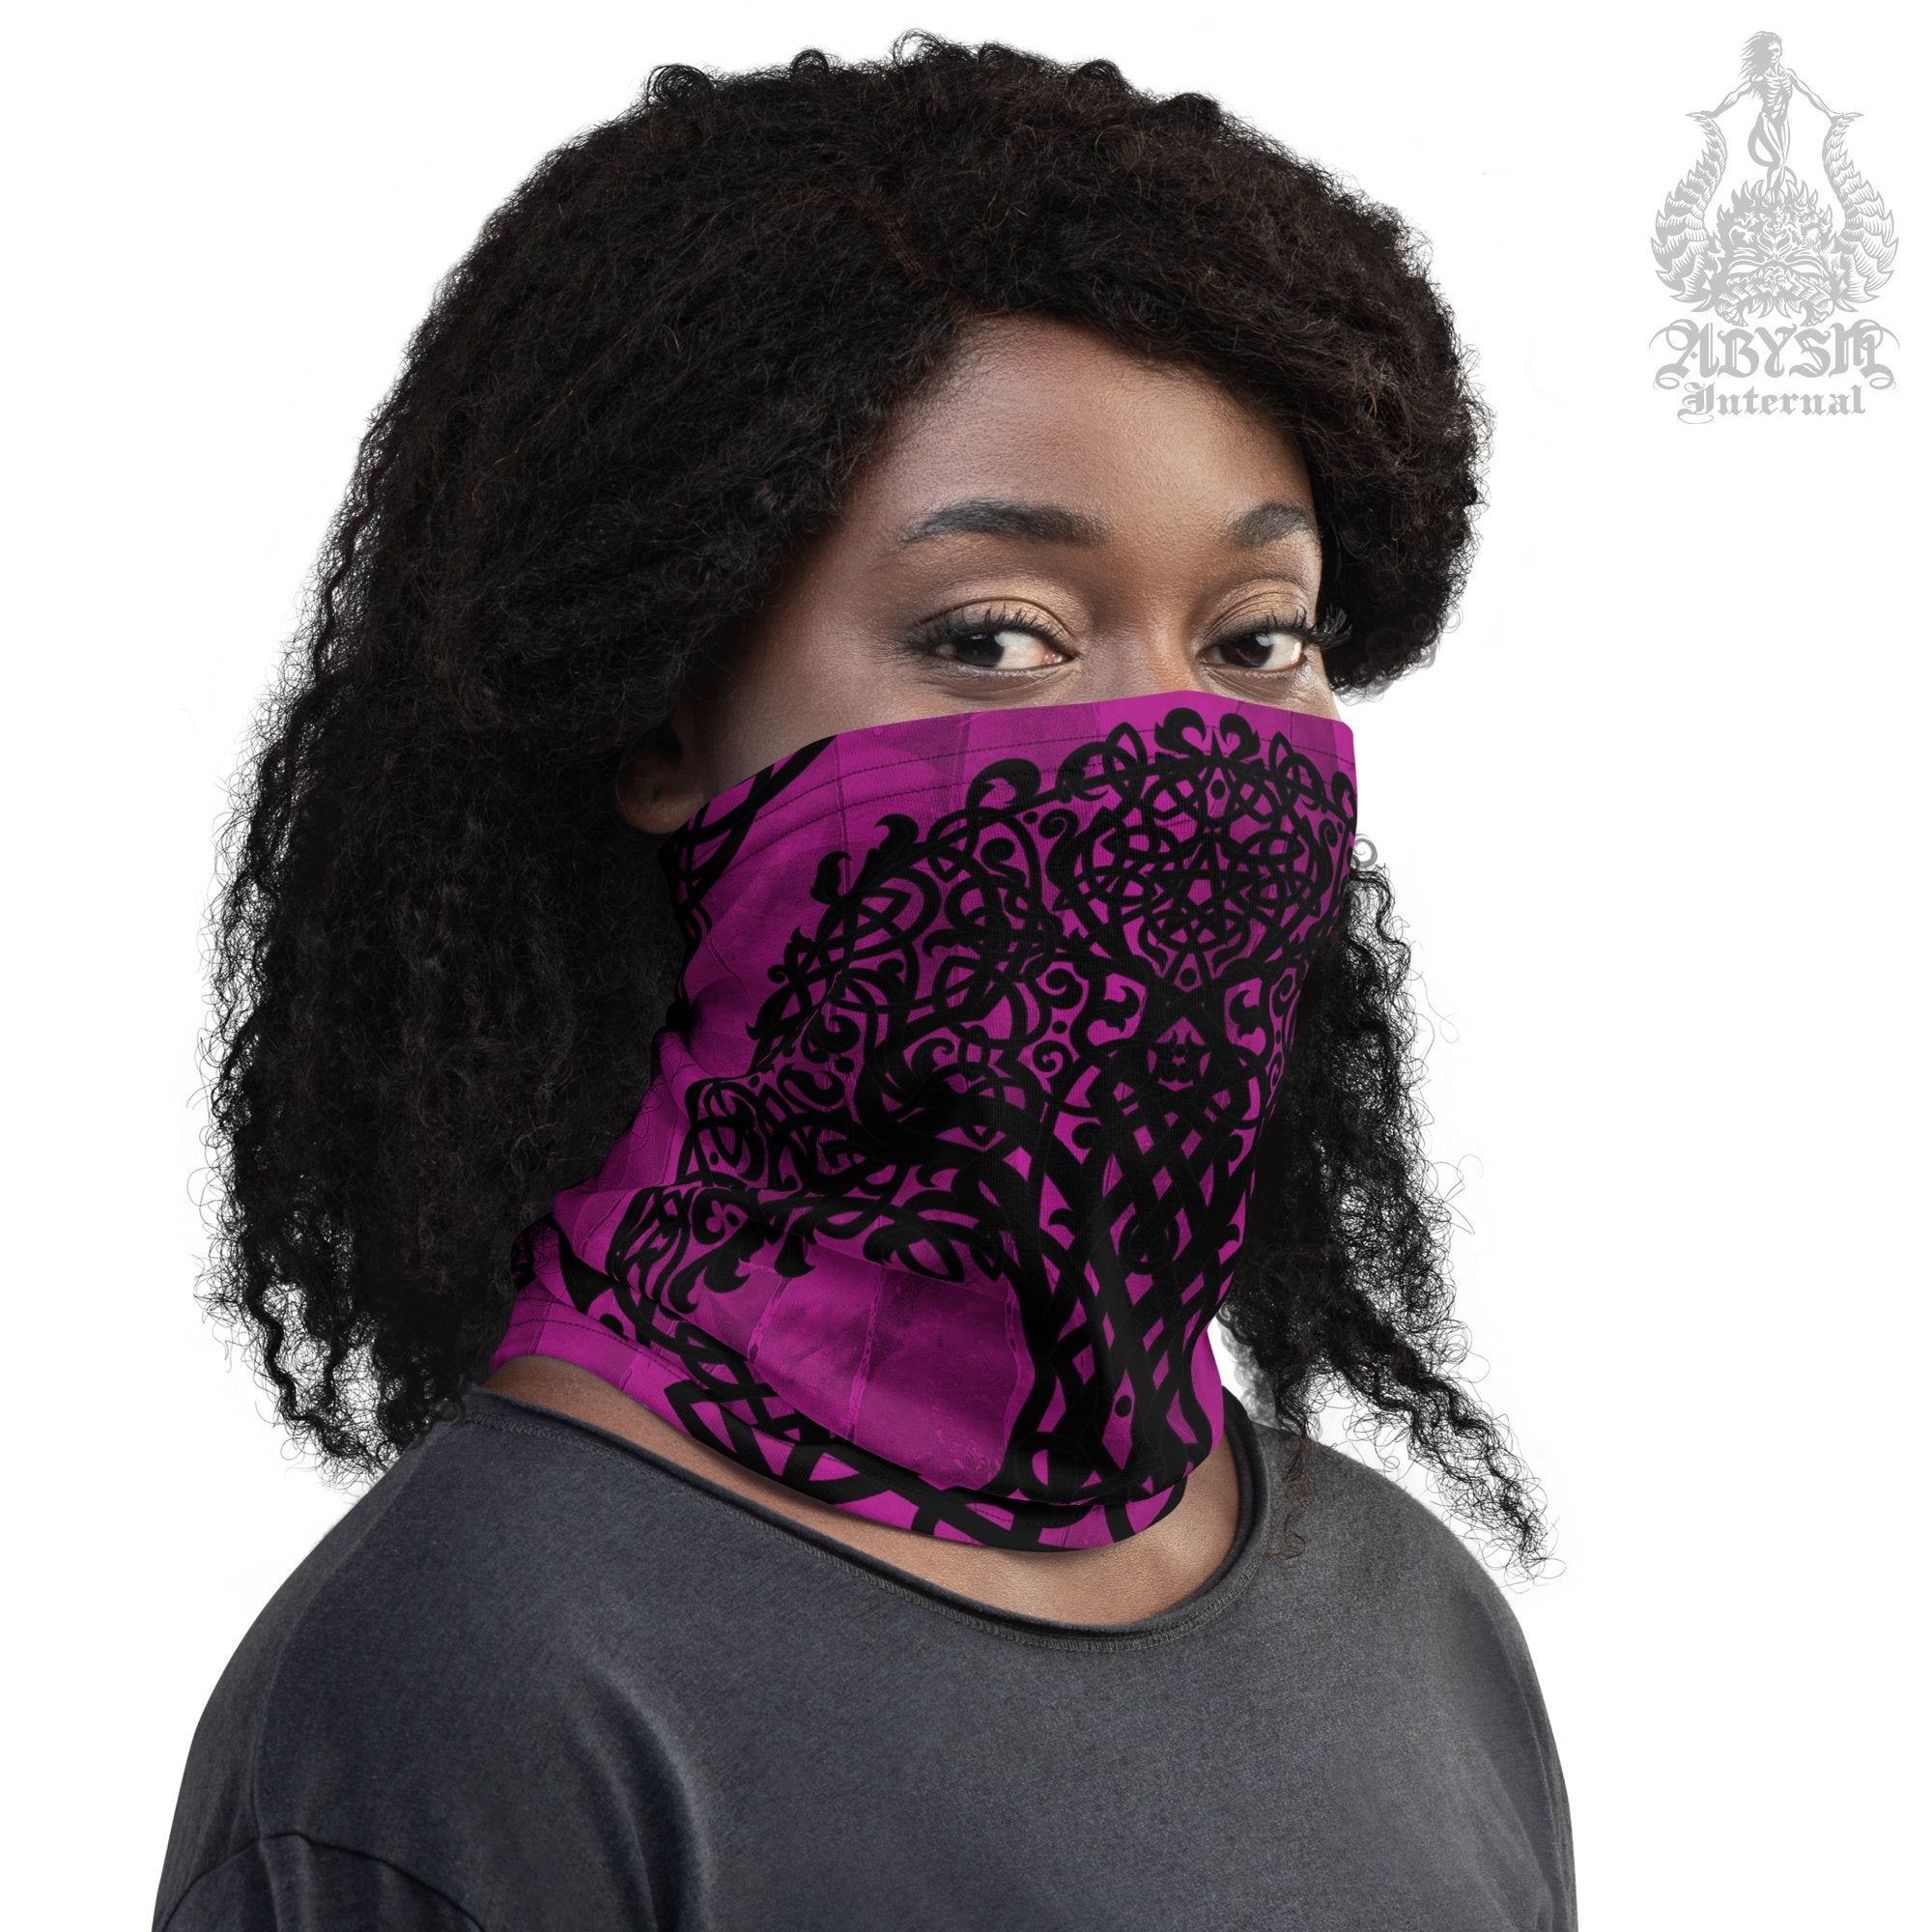 Witchy Neck Gaiter, Face Mask, Head Covering, Pagan Outfit, Tree of Life - Pink and Black - Abysm Internal